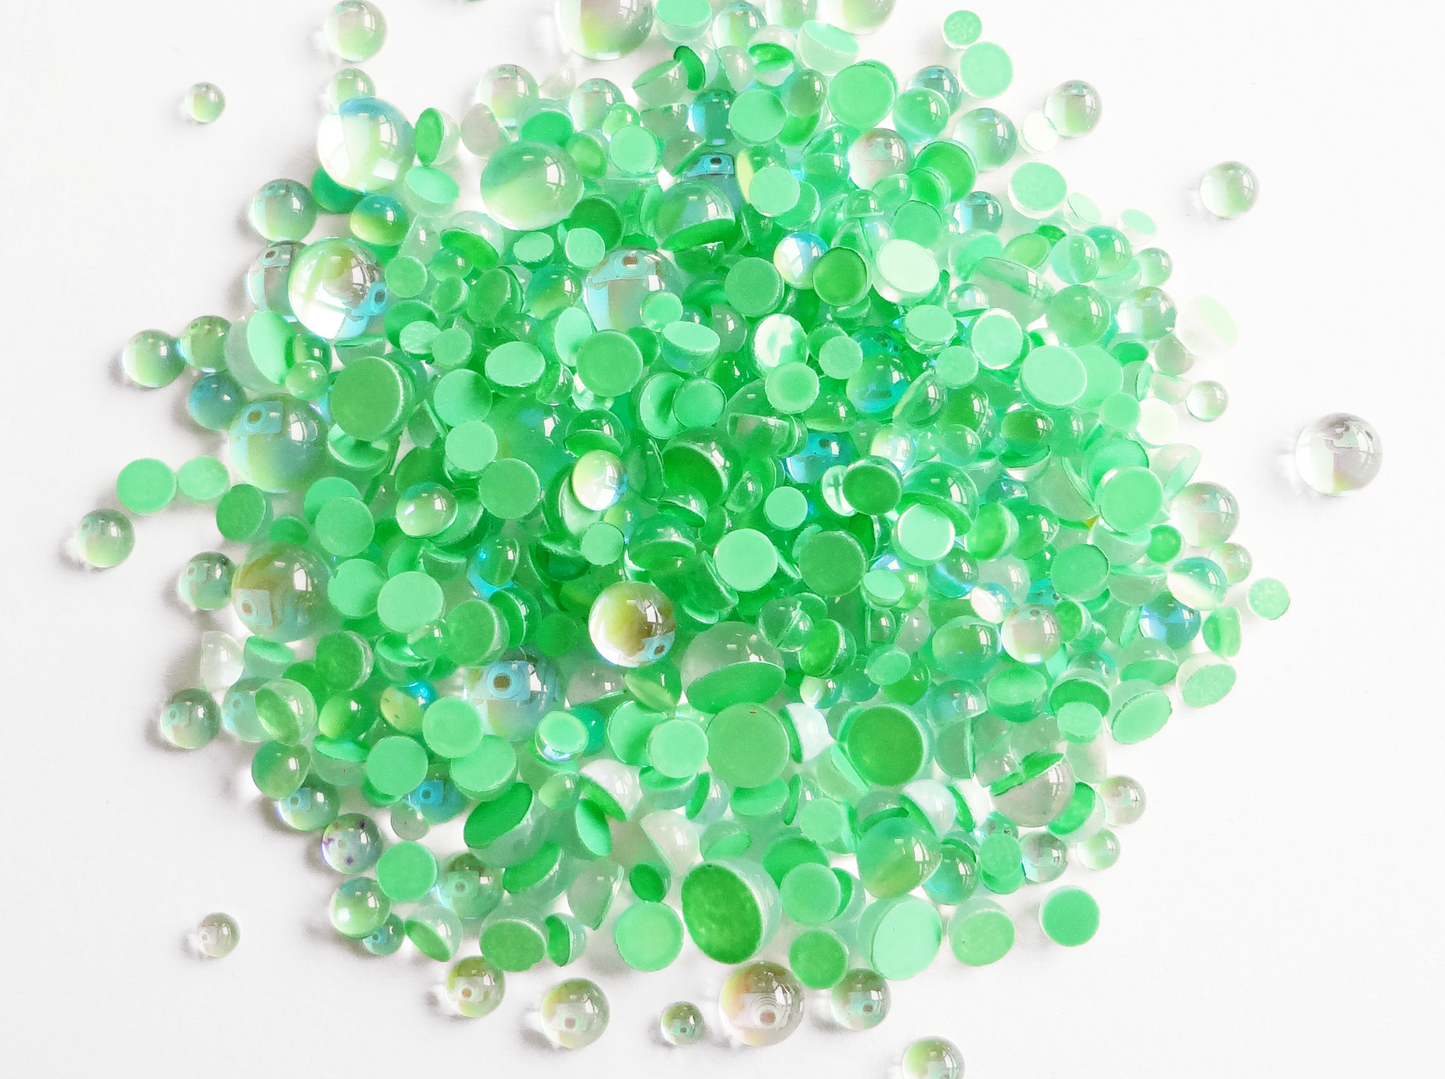 Load image into Gallery viewer, Iridescent Green Glass Bubble Effect Flatbacks, 1mm to 5mm Mixed Sizes
